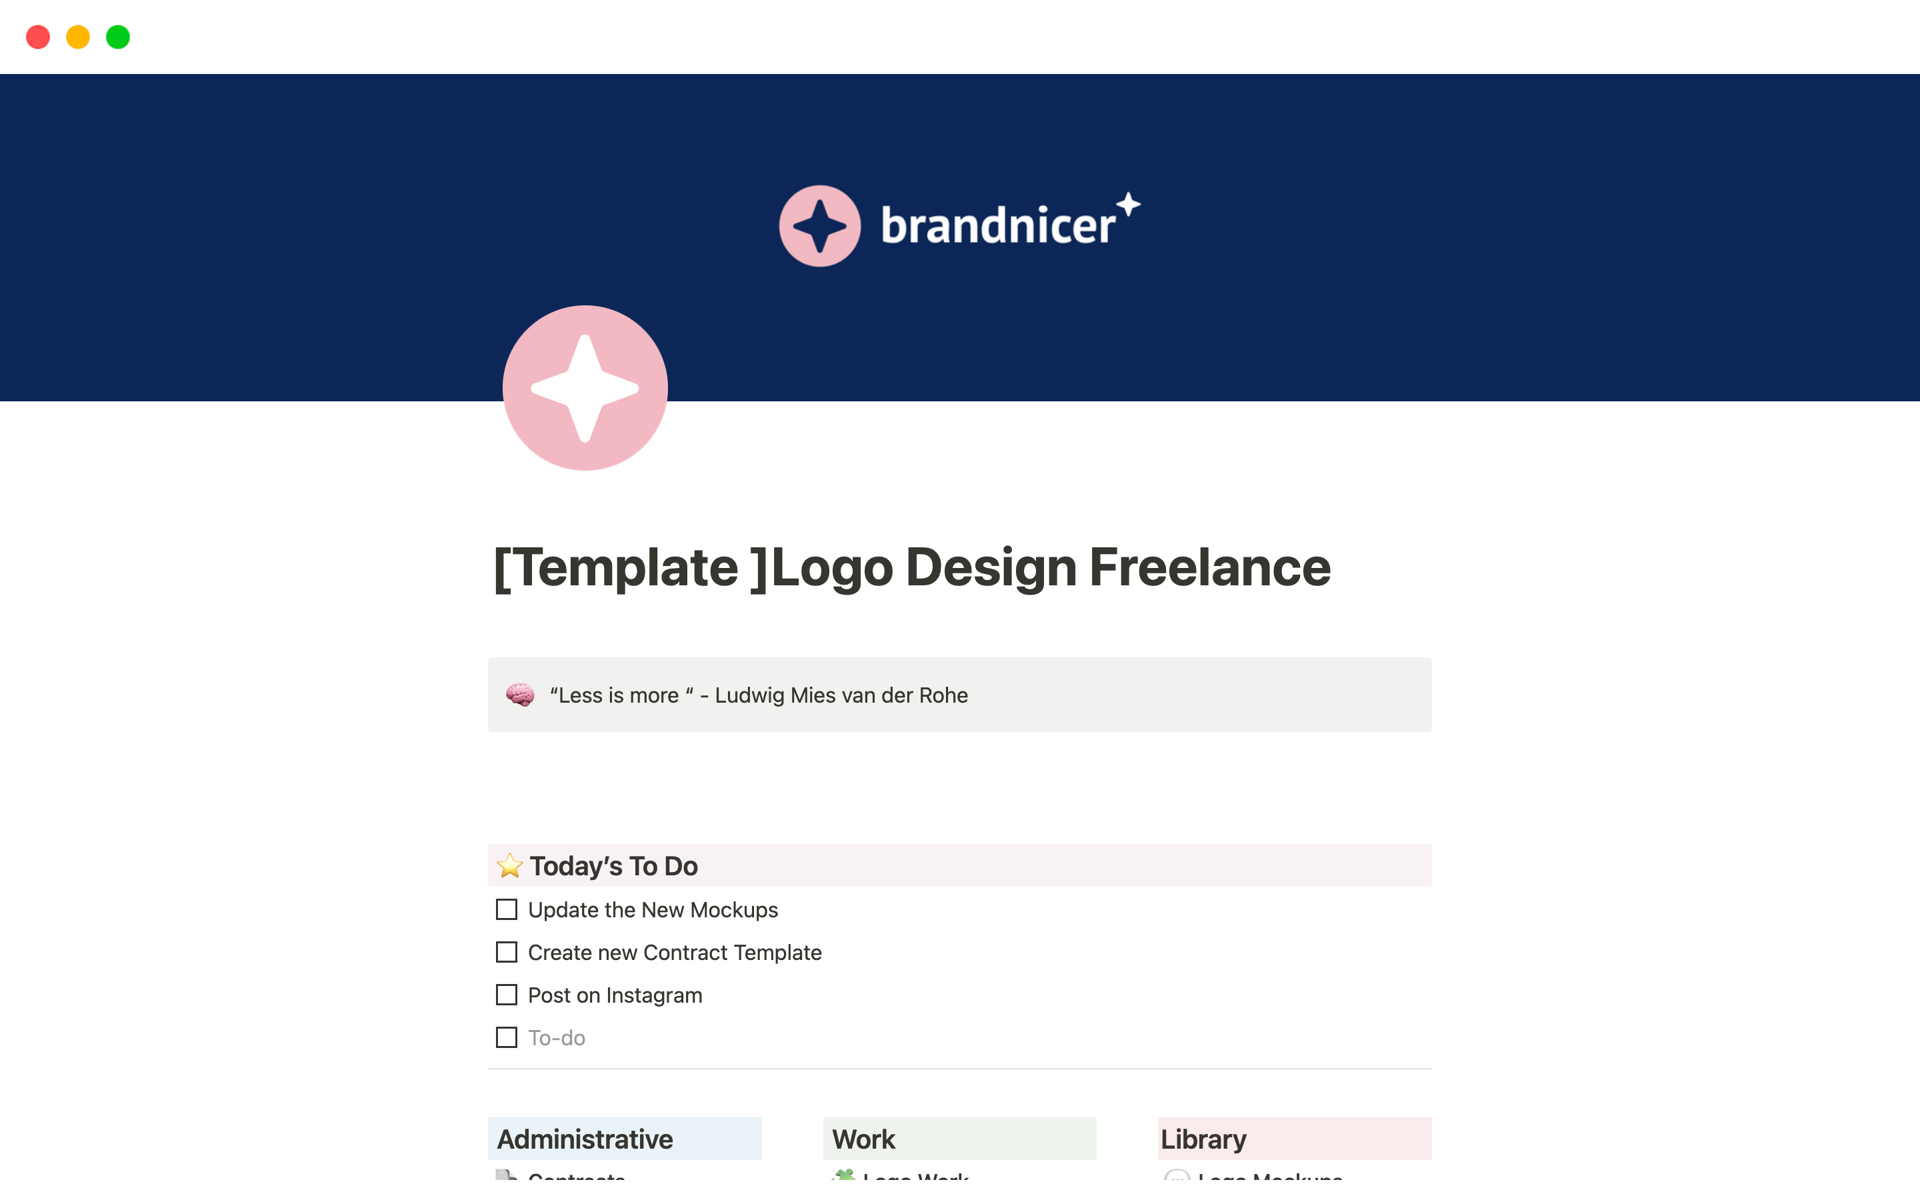 Logo Design Freelance - is a Notion Dashboard to help logo designers keep track of their projects, simple and easy to use.